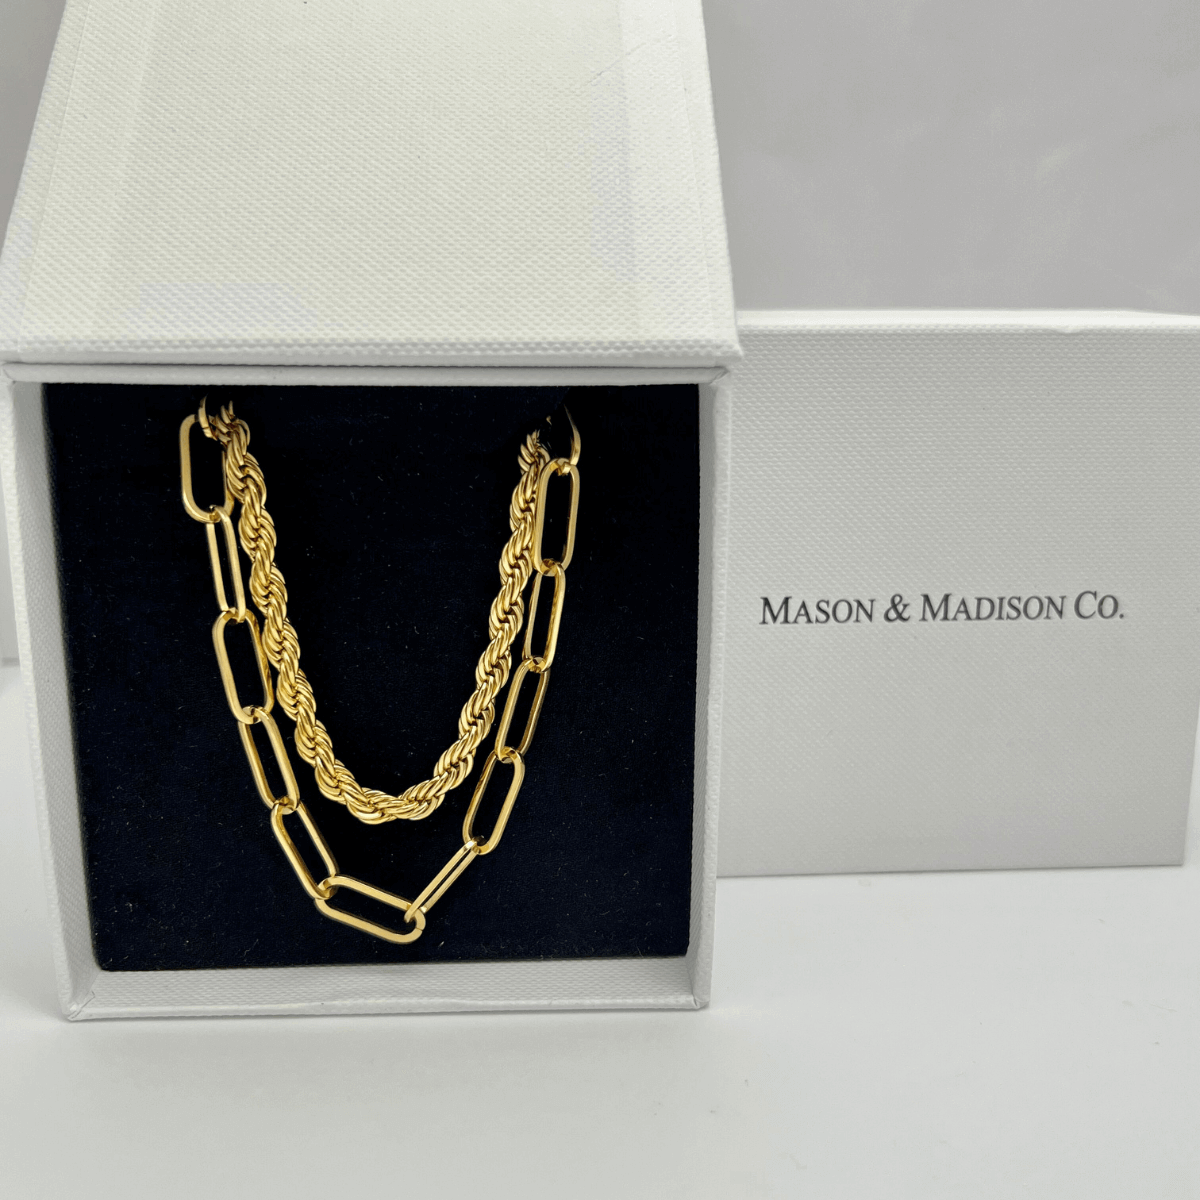 1# BEST Gold Layering Chain Necklaces Bundle Jewelry Gift Set for Women | #1 Best Most Top Trendy Trending Aesthetic Yellow Gold Chain Necklace Jewelry Gift for Women, Mother, Wife, Ladies| Mason & Madison Co.